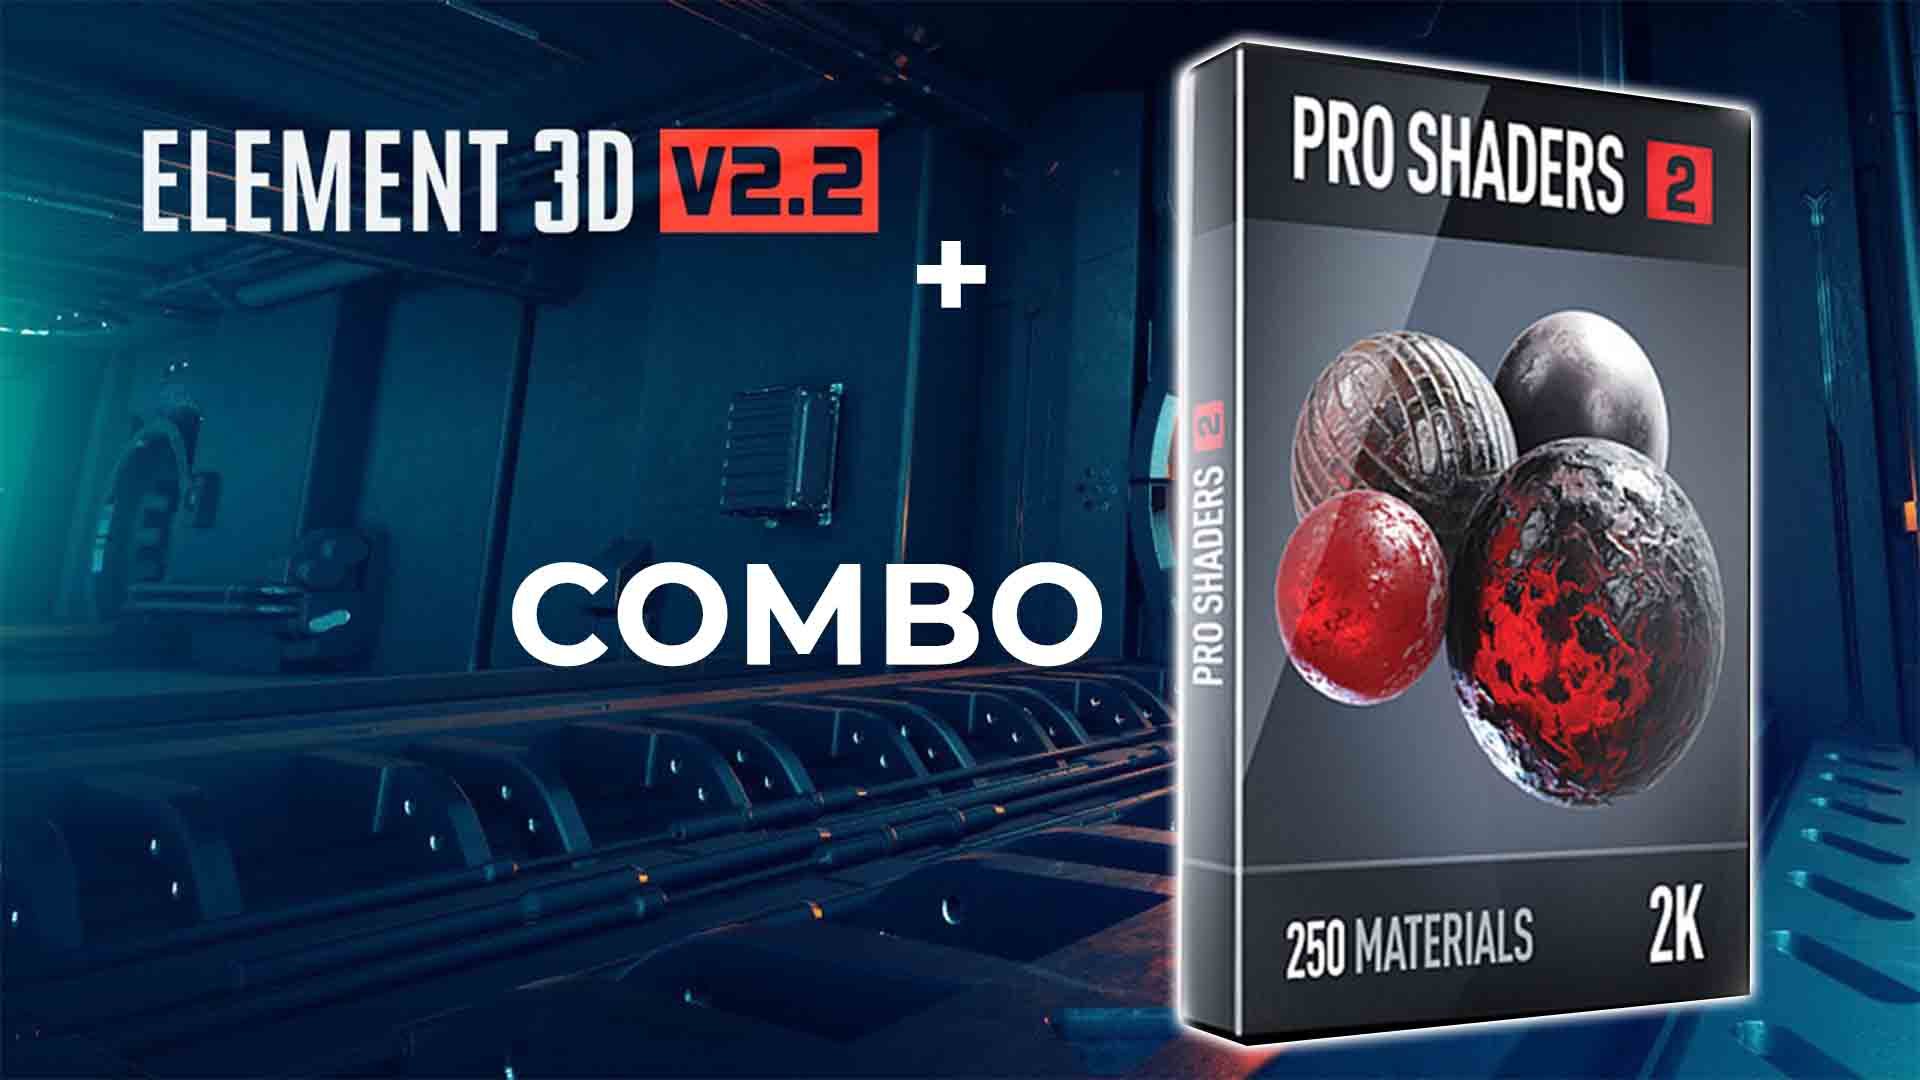 VIDEO COPILOT Pro Shaders 2 Crack FREE Download